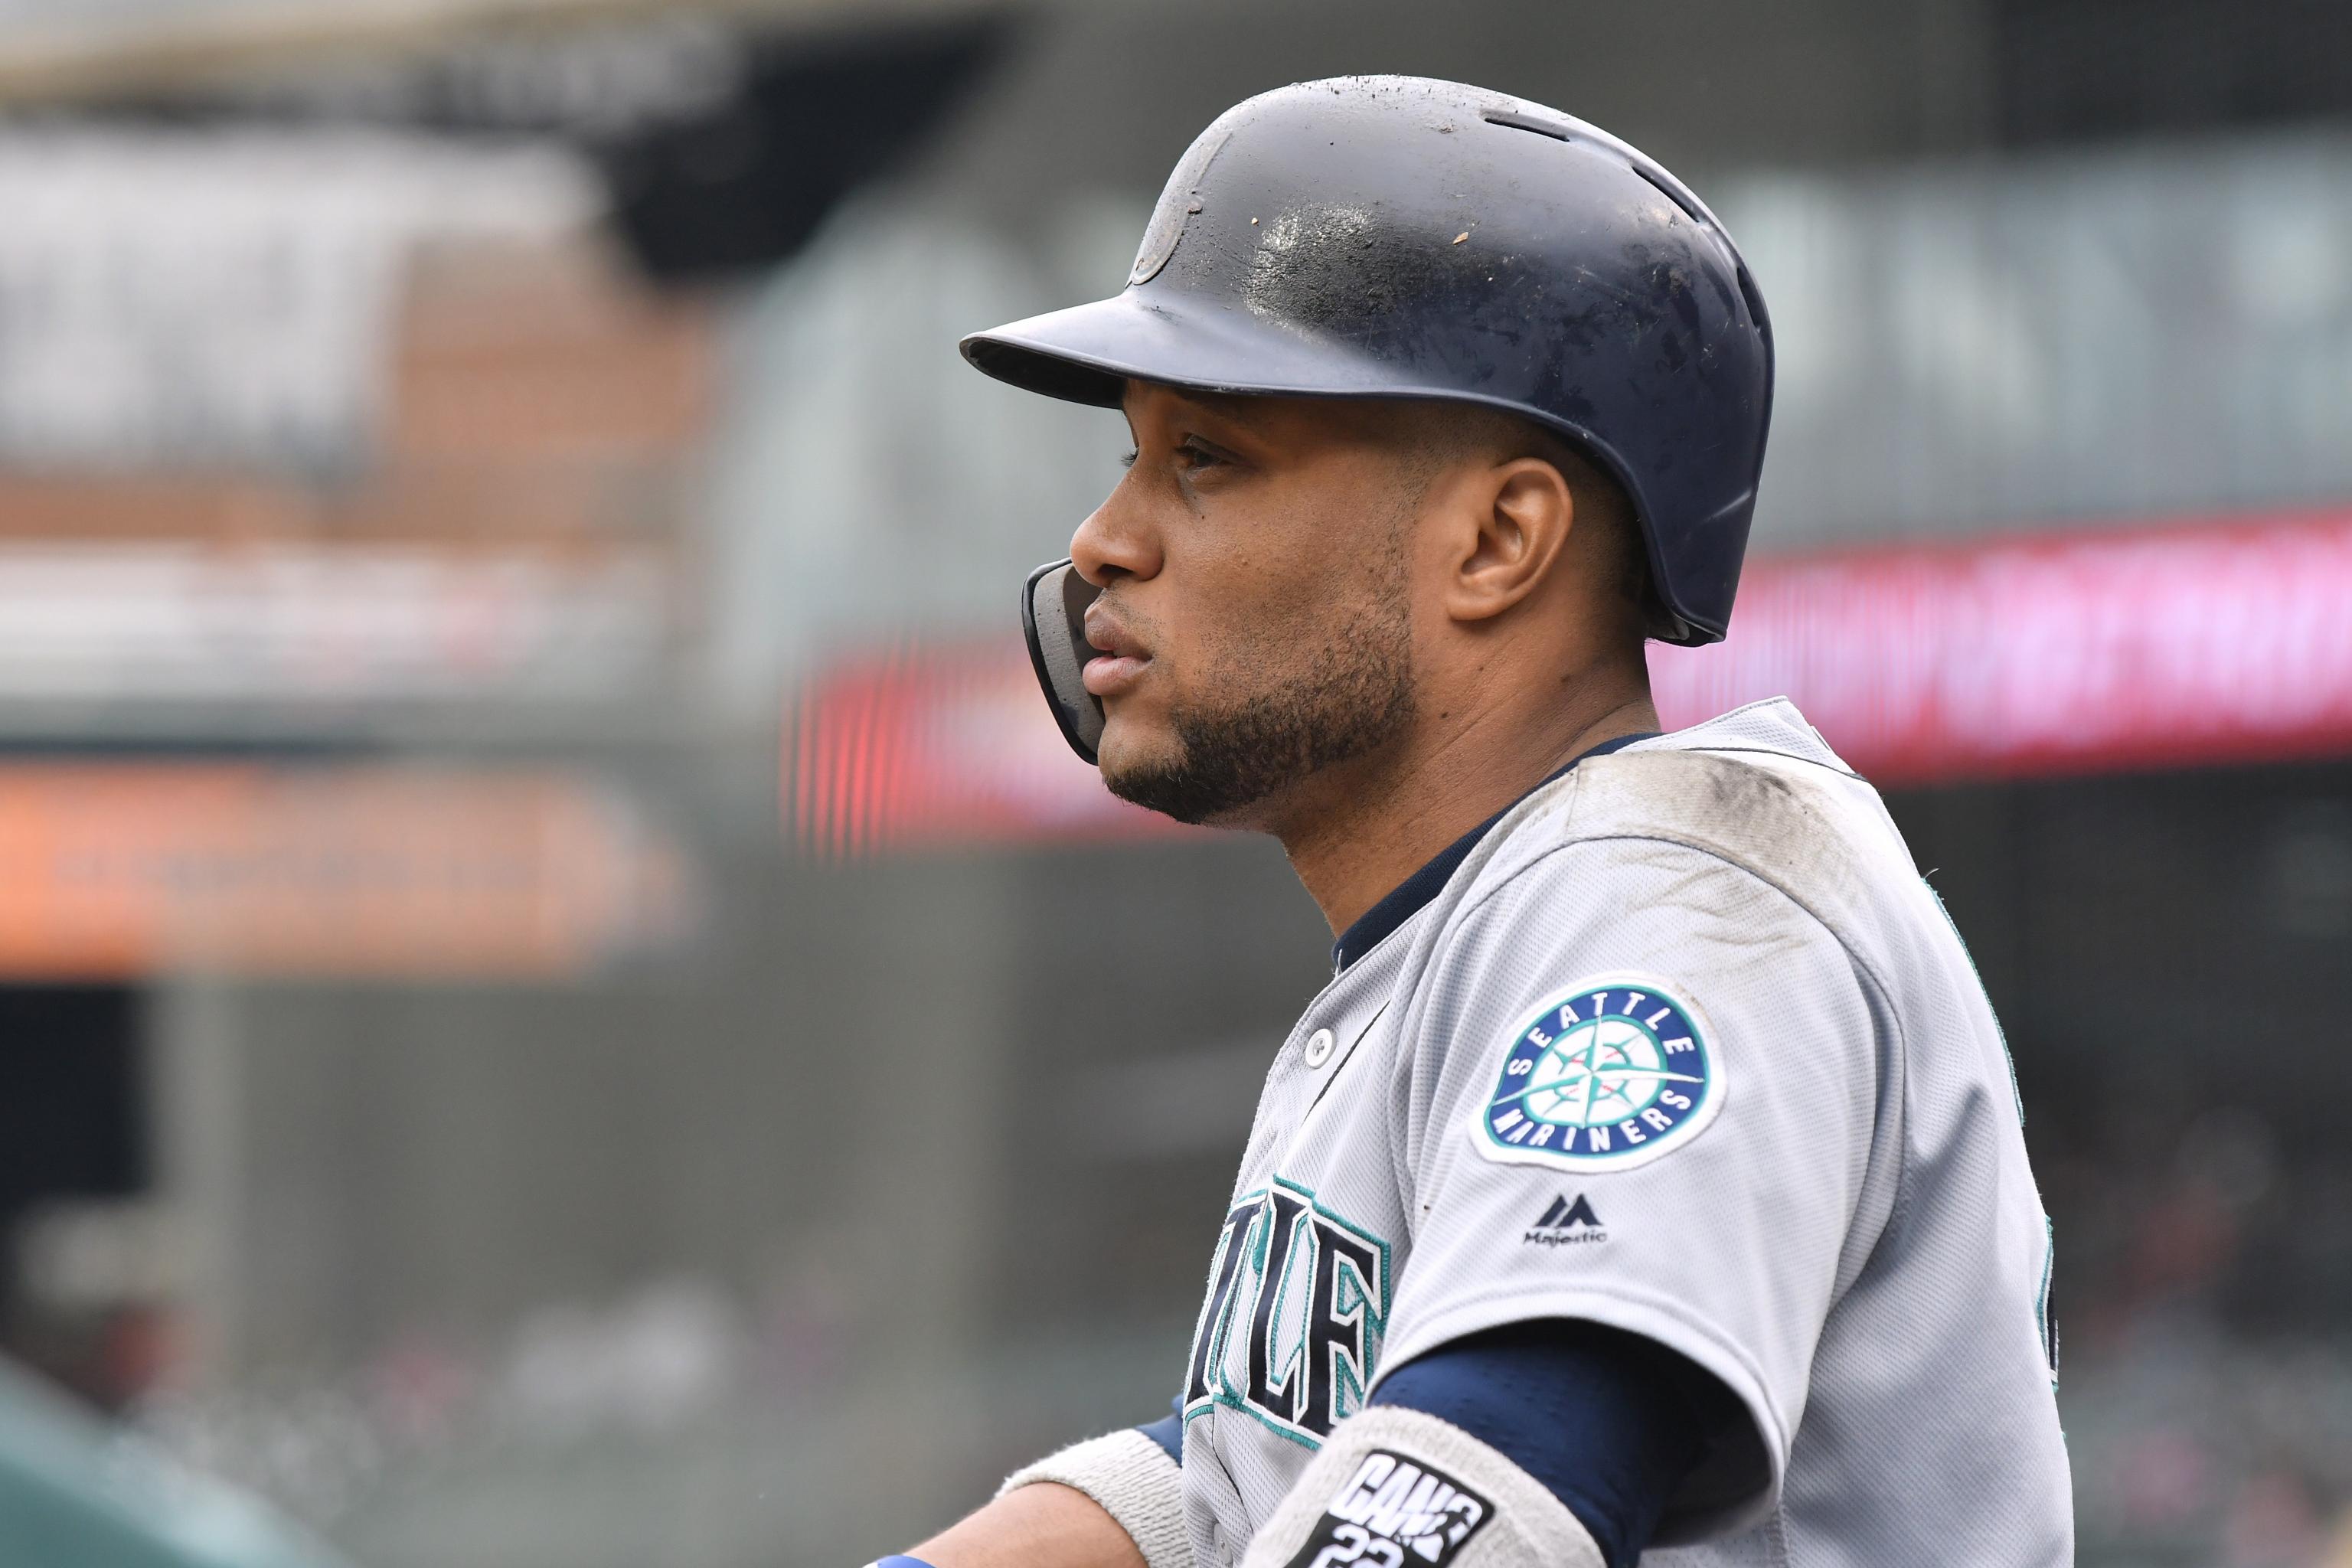 Yankees' Robinson Cano Involved in Child-Support Case - WSJ